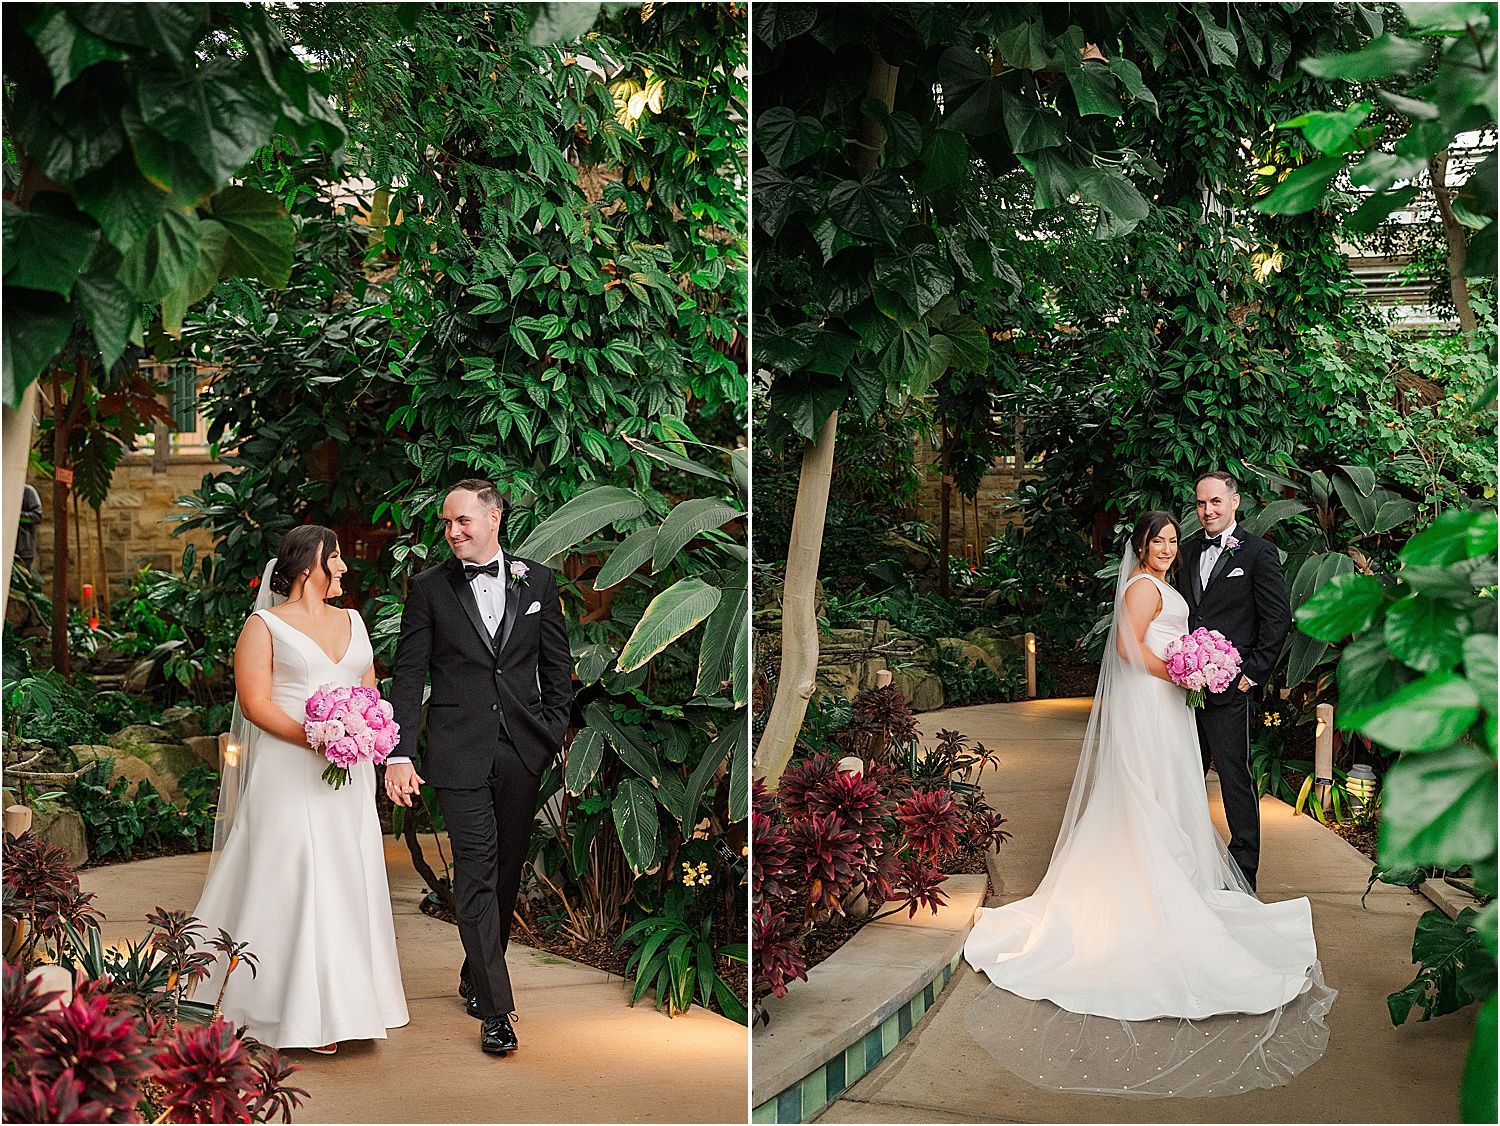 bride and groom in tropical rainforest at phipps conservatory • Wild Weather - Love at a Phipps Conservatory Outdoor Garden Wedding